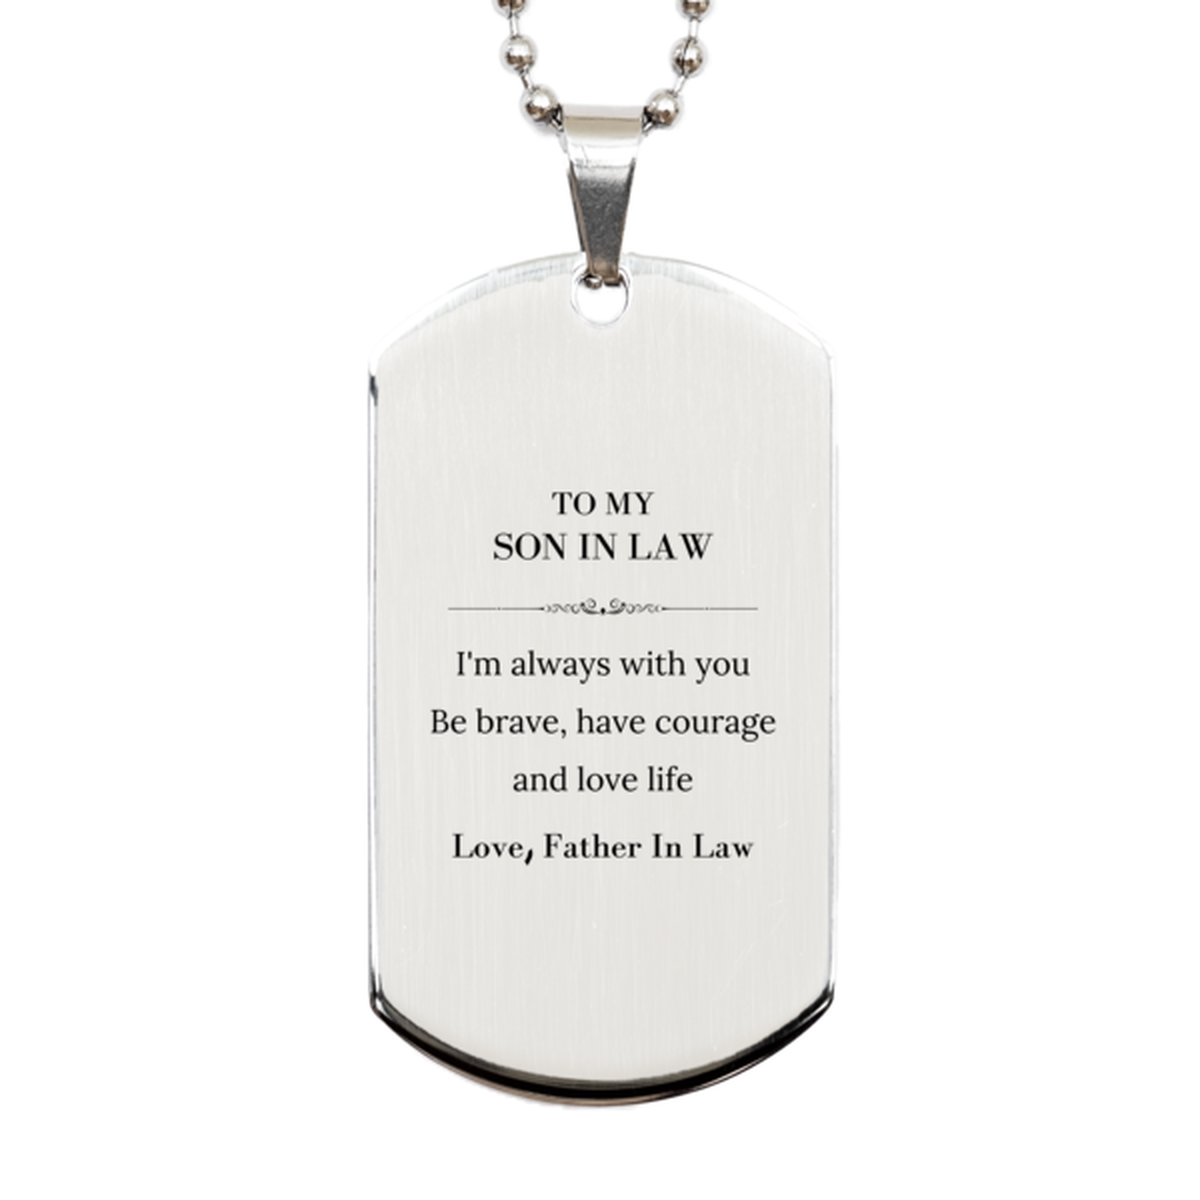 To My Son In Law Gifts from Father In Law, Unique Silver Dog Tag Inspirational Christmas Birthday Graduation Gifts for Son In Law I'm always with you. Be brave, have courage and love life. Love, Father In Law